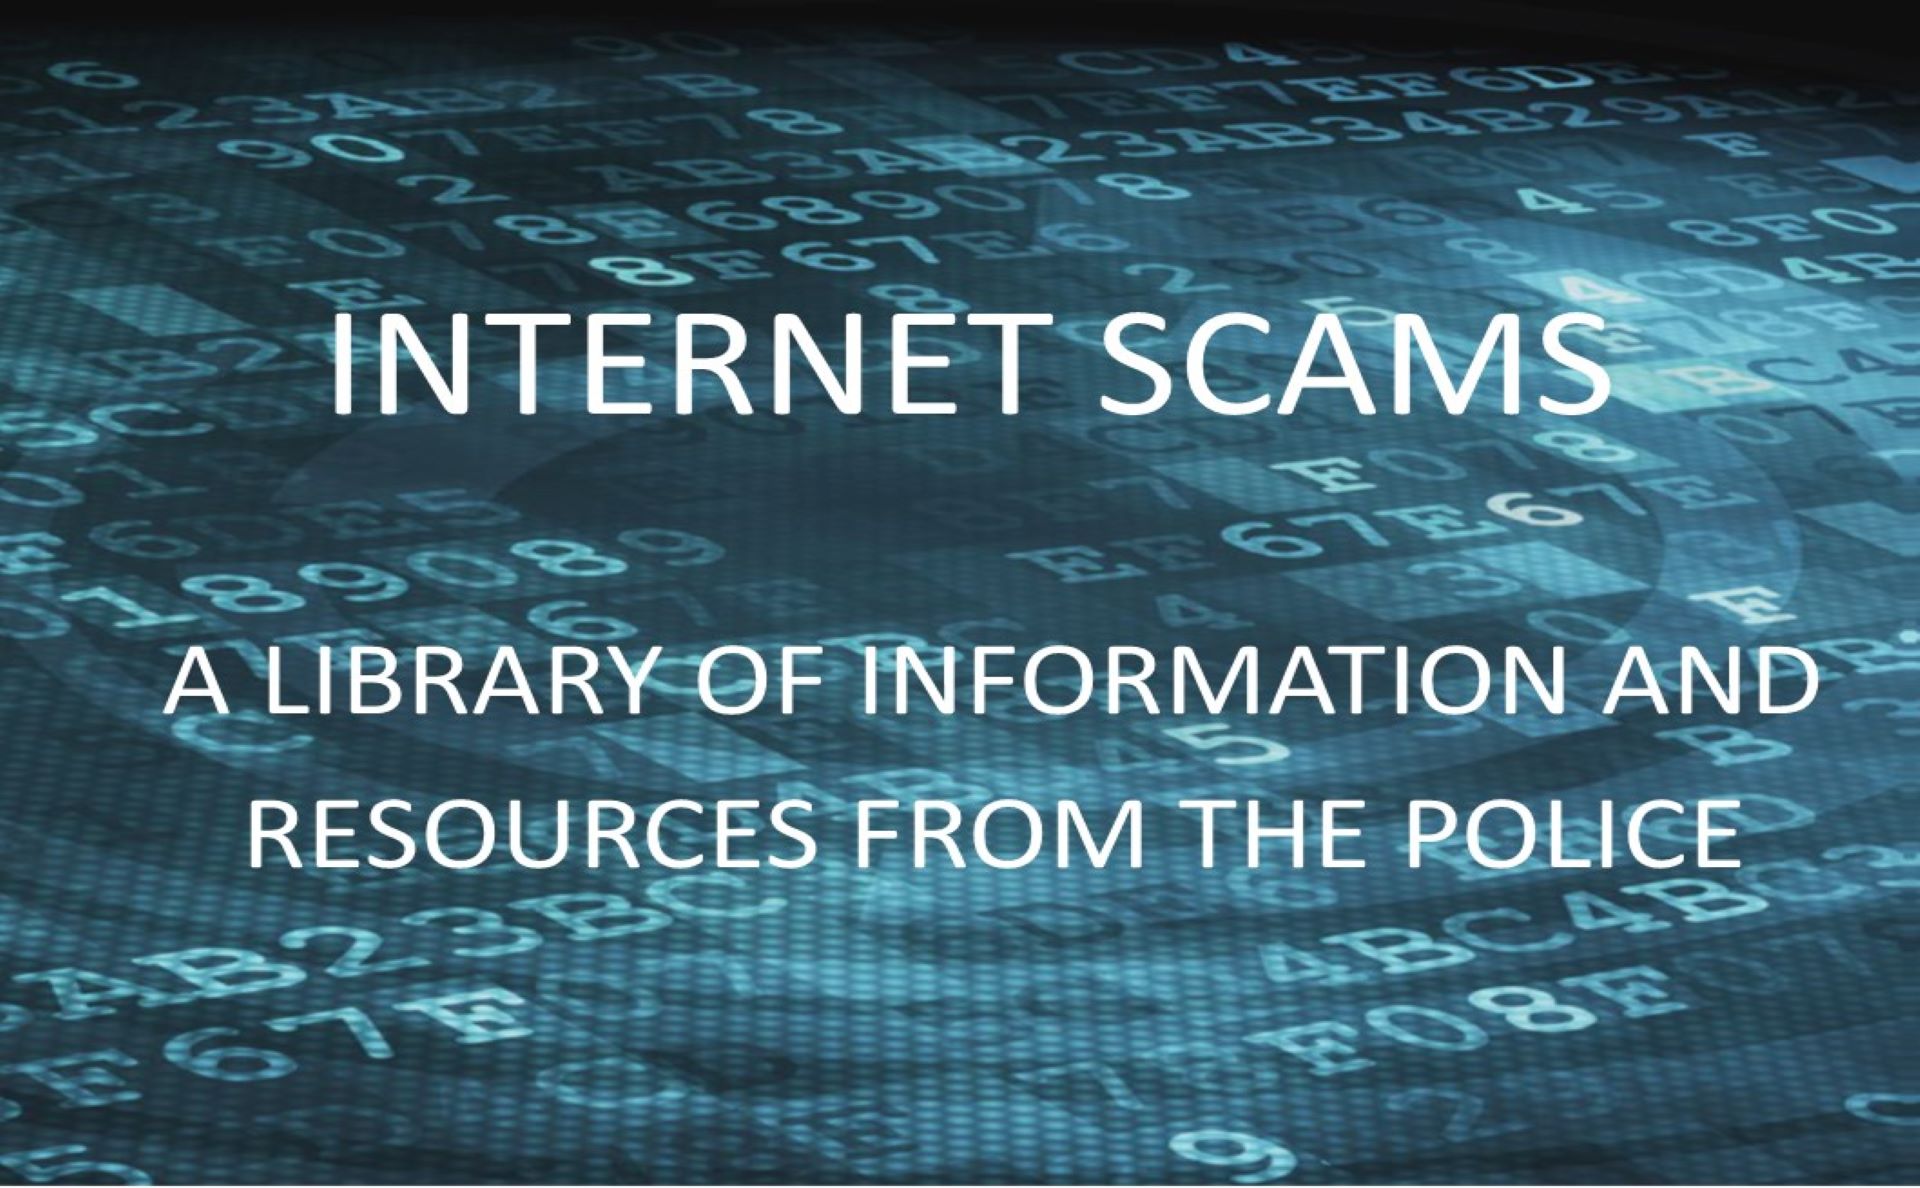 Internet scams picture resized